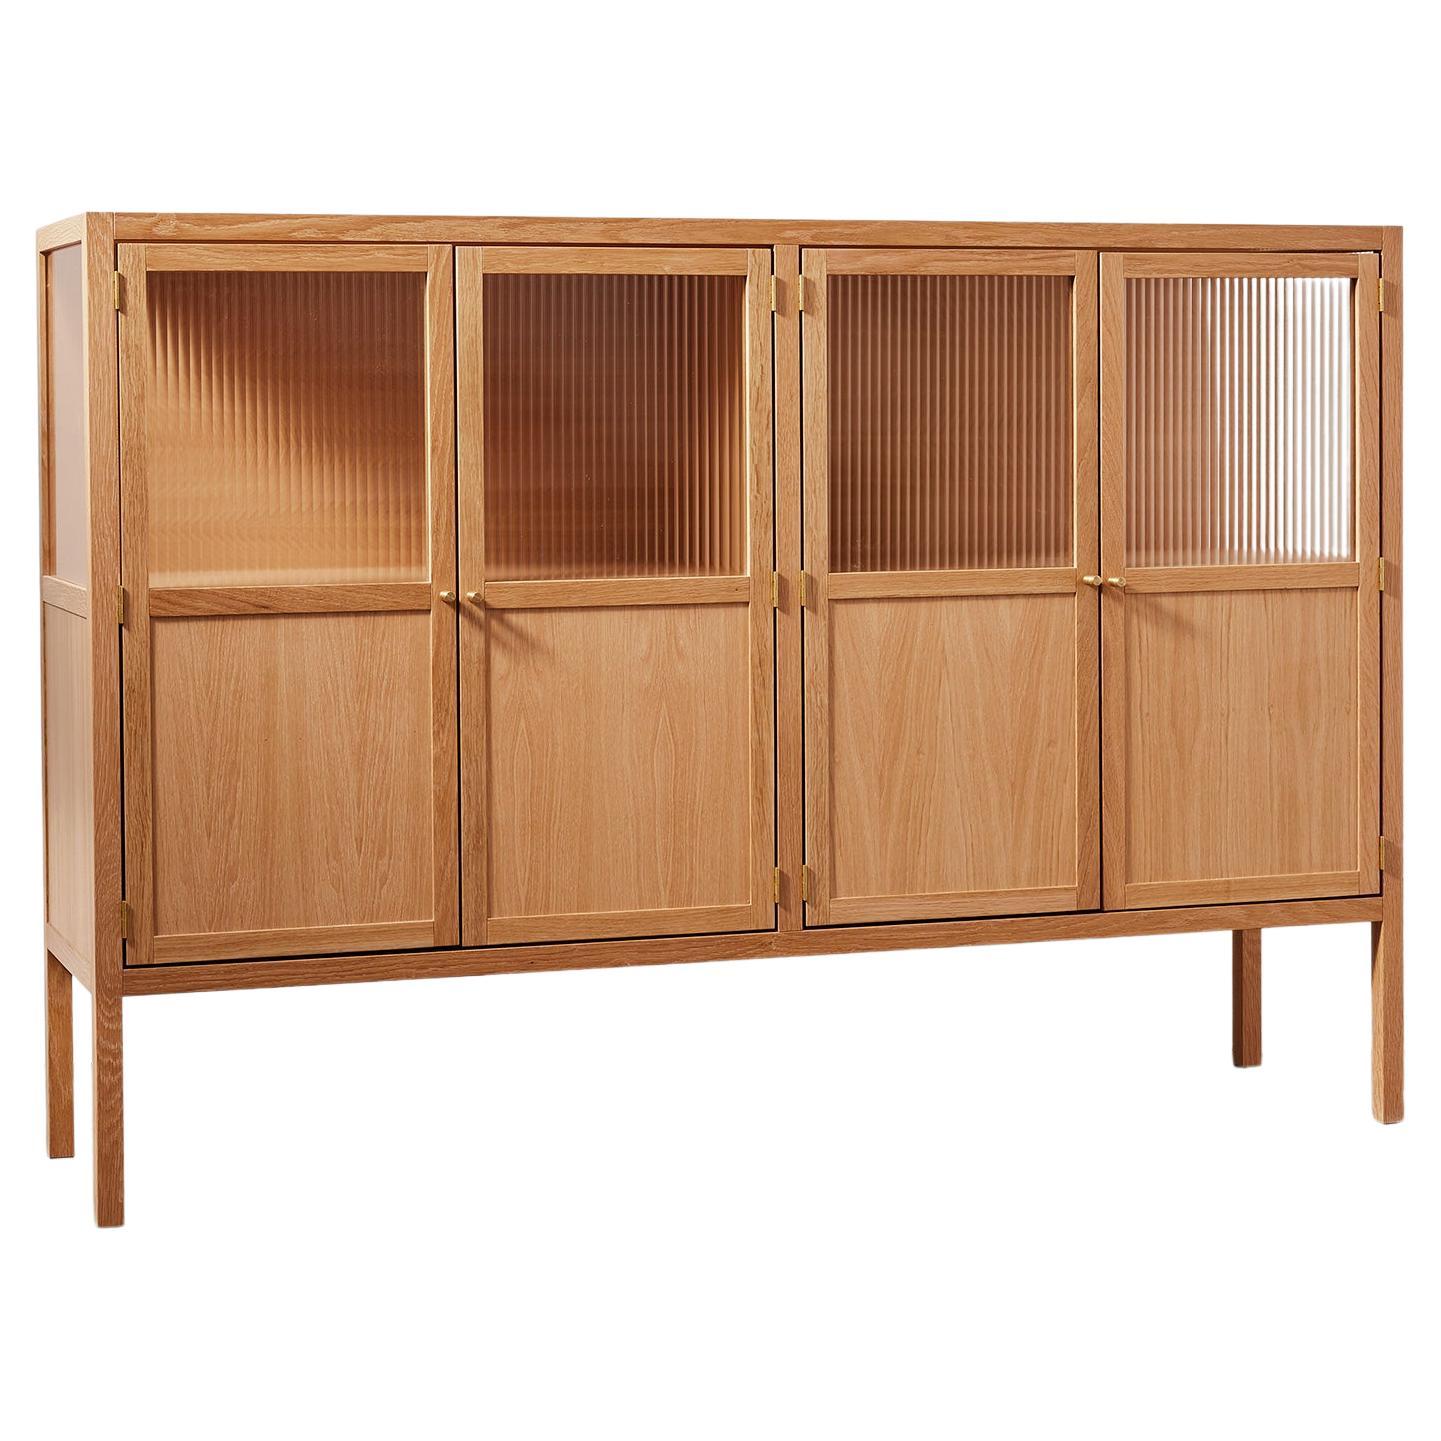 Handmade Alma Credenza - Oak and Reeded Glass - by BACD studio